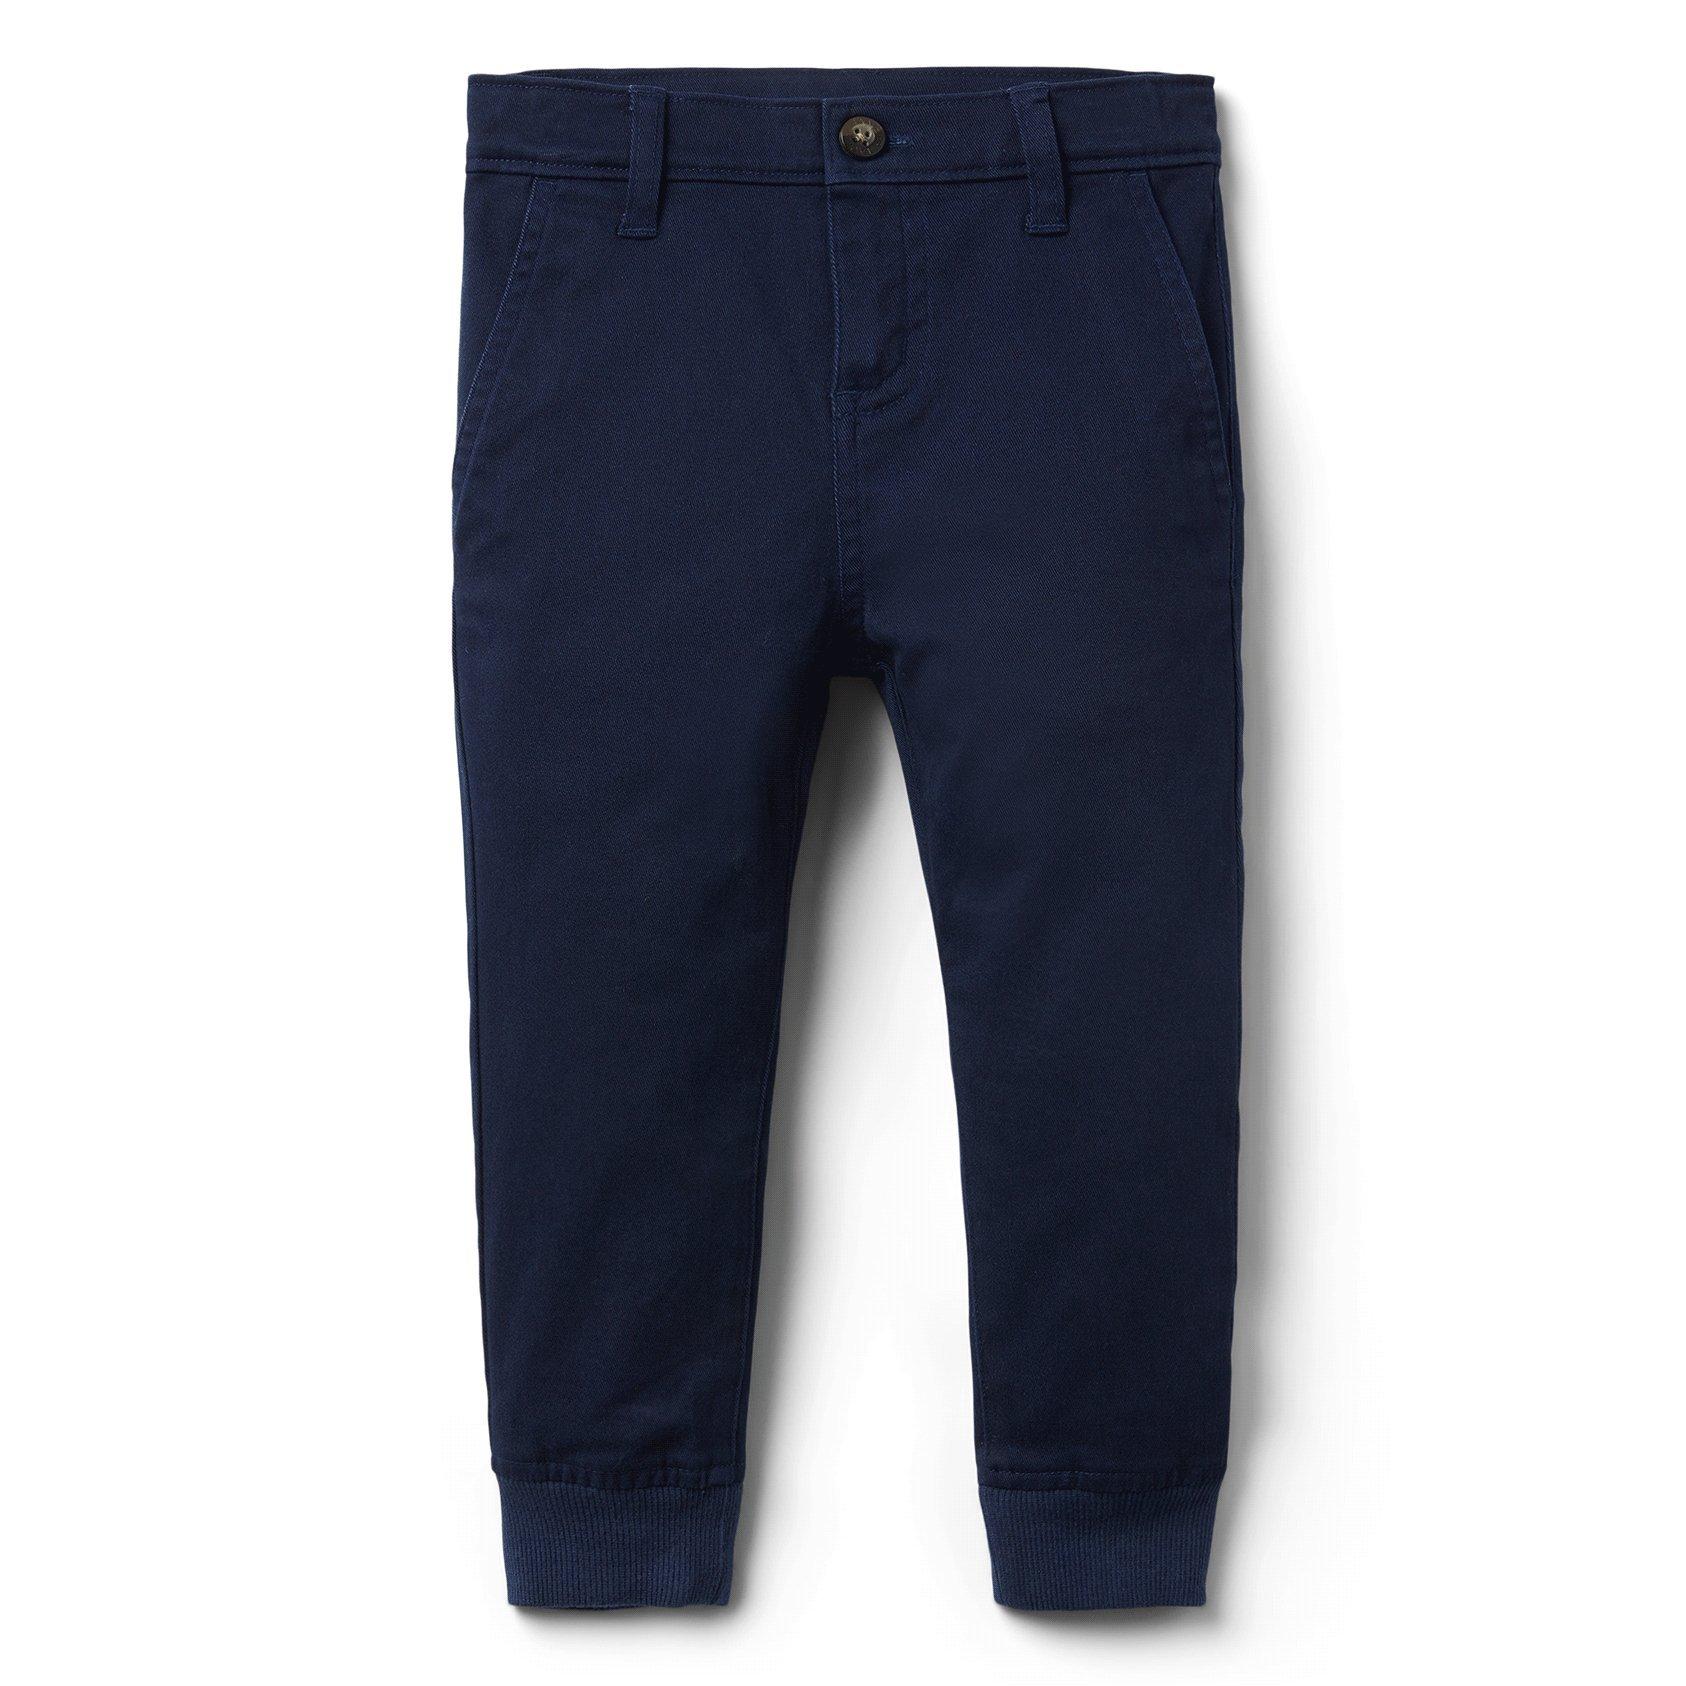 The Stretch Twill Jogger 